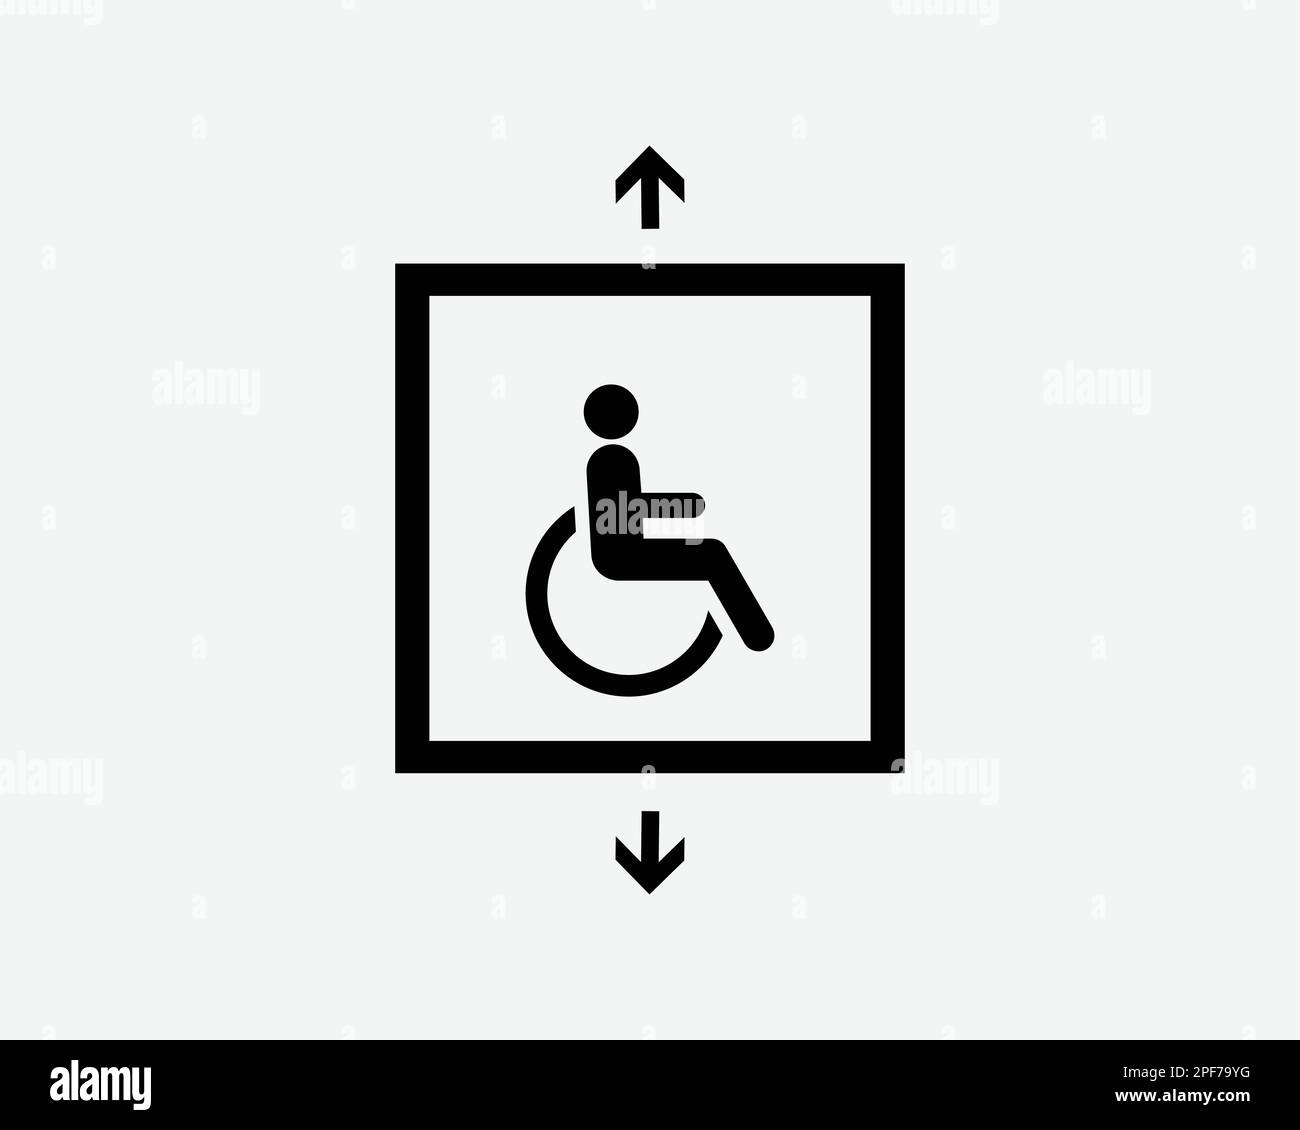 Disable Elevator Handicap Lift Wheelchair Access Signage Black White Silhouette Sign Symbol Icon Clipart Graphic Artwork Pictogram Illustration Vector Stock Vector